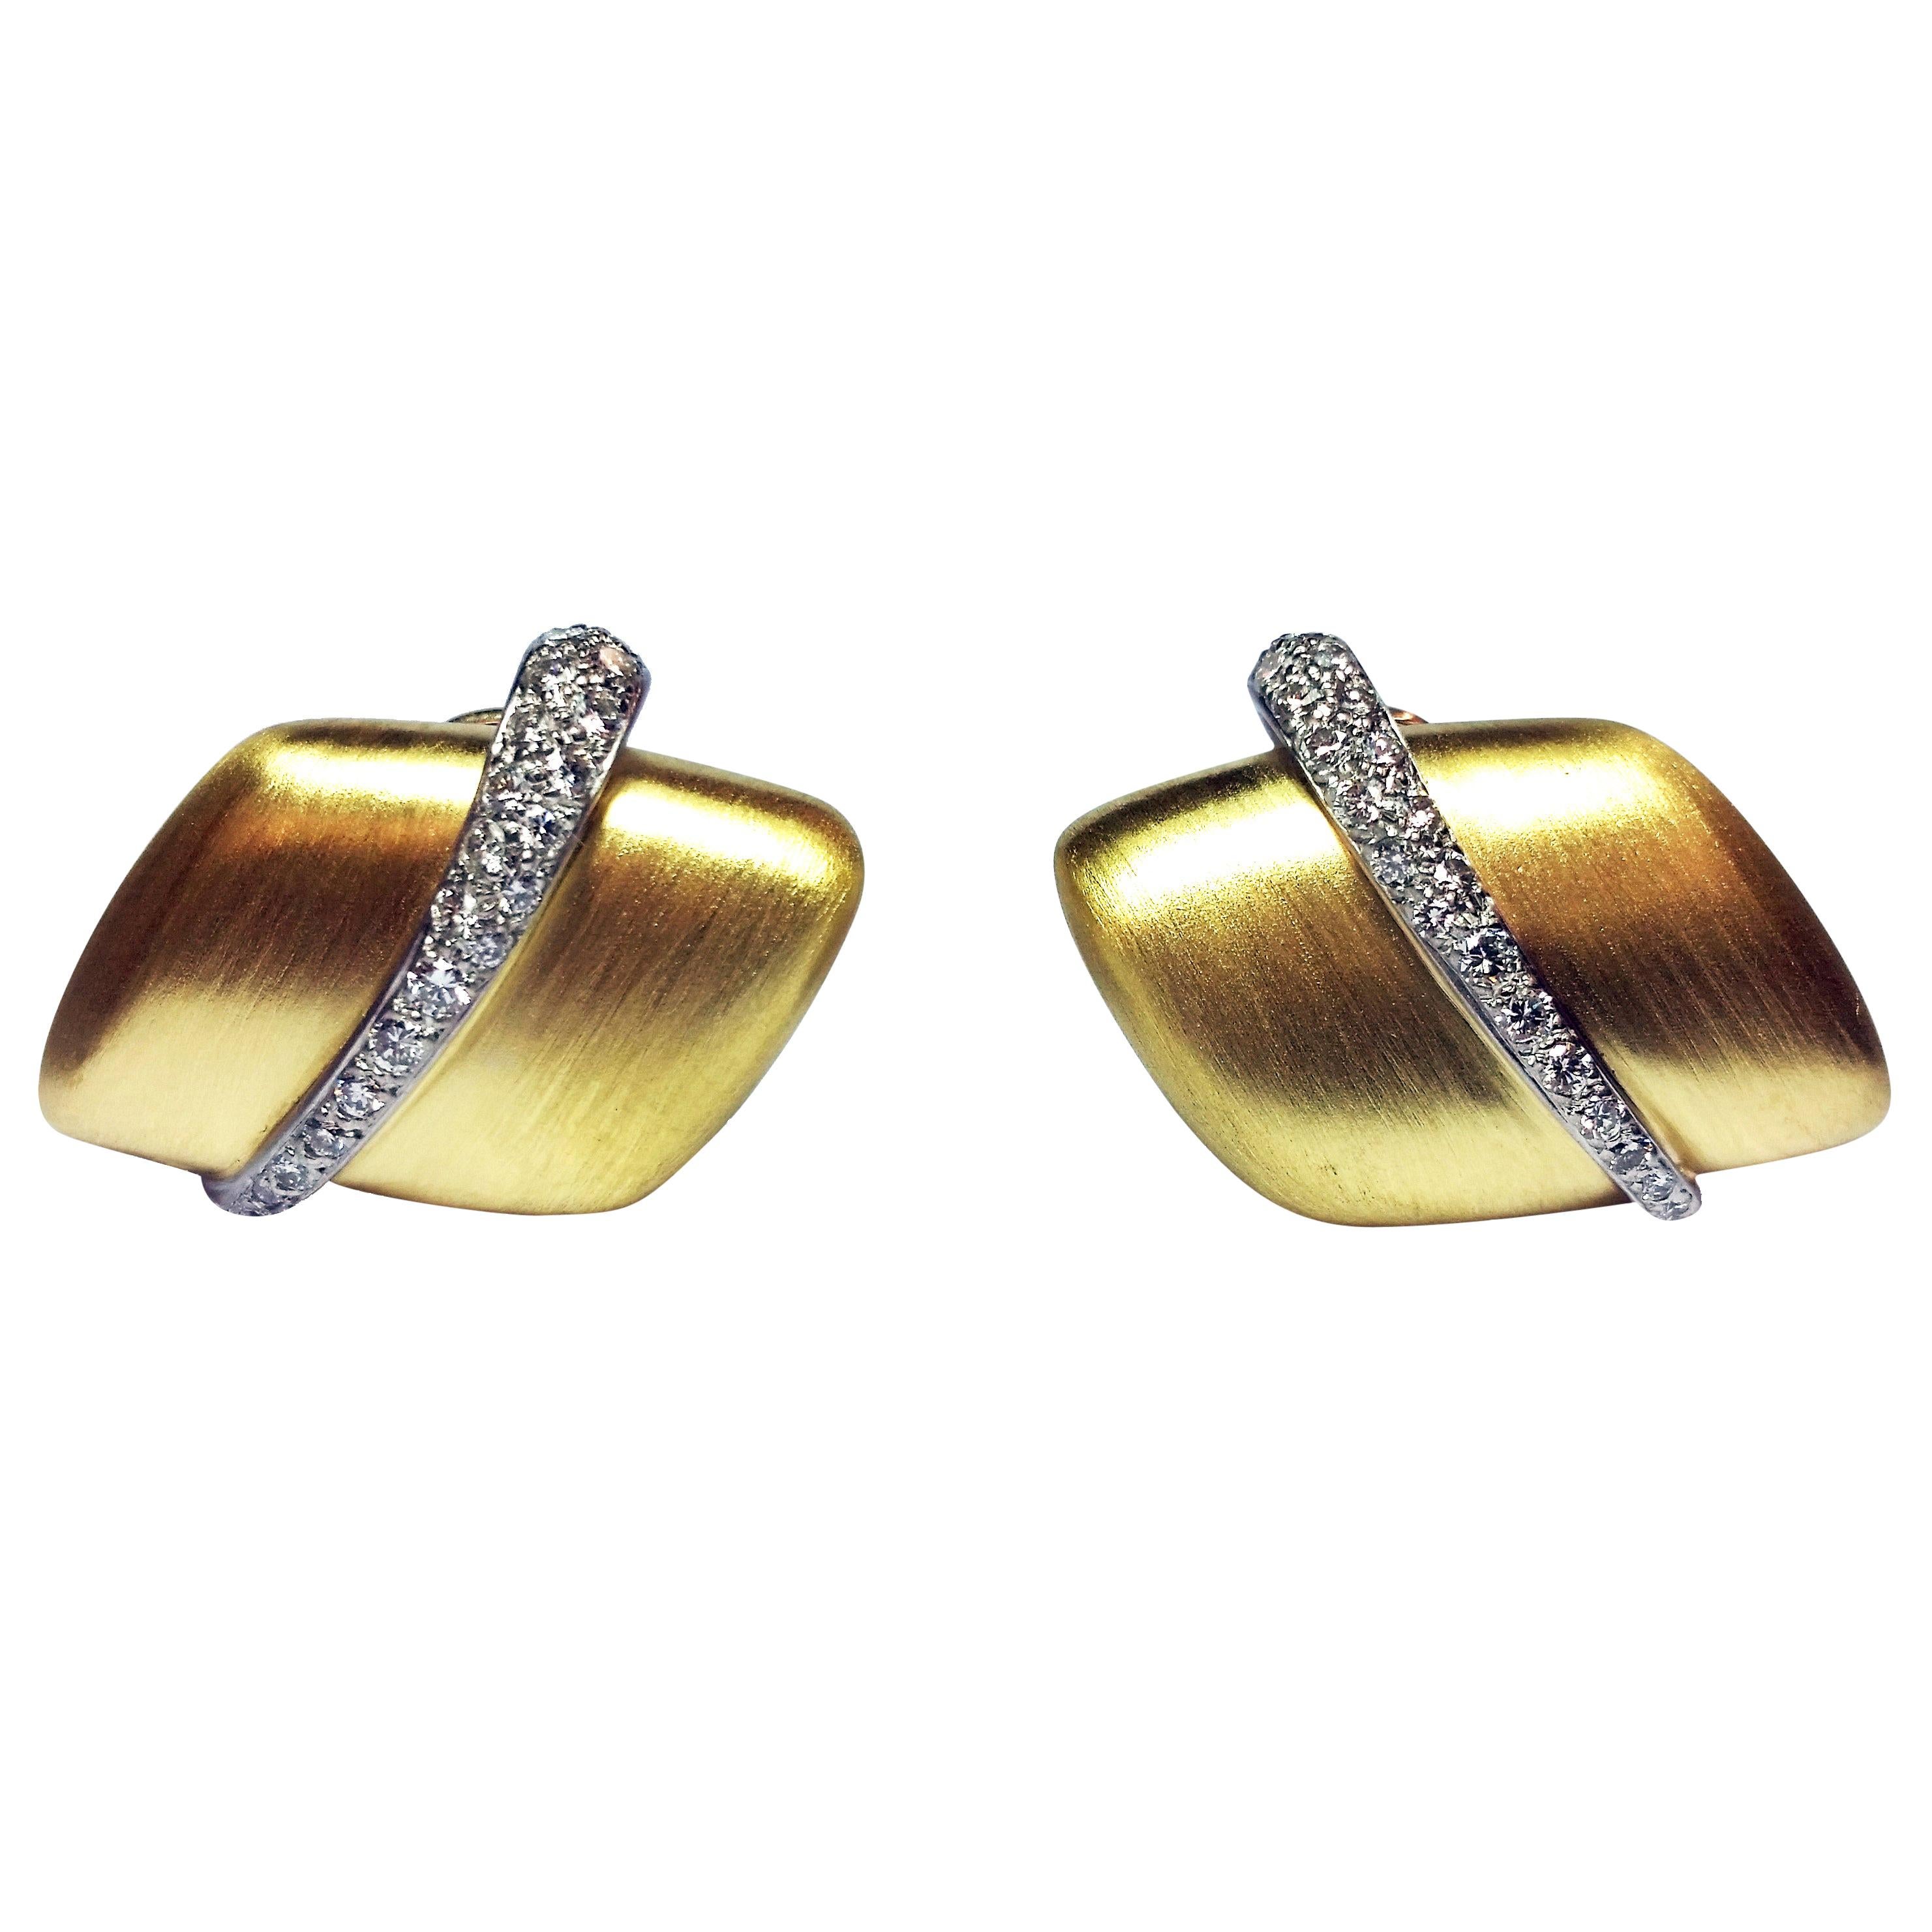 Brushed Gold and Diamond Earrings